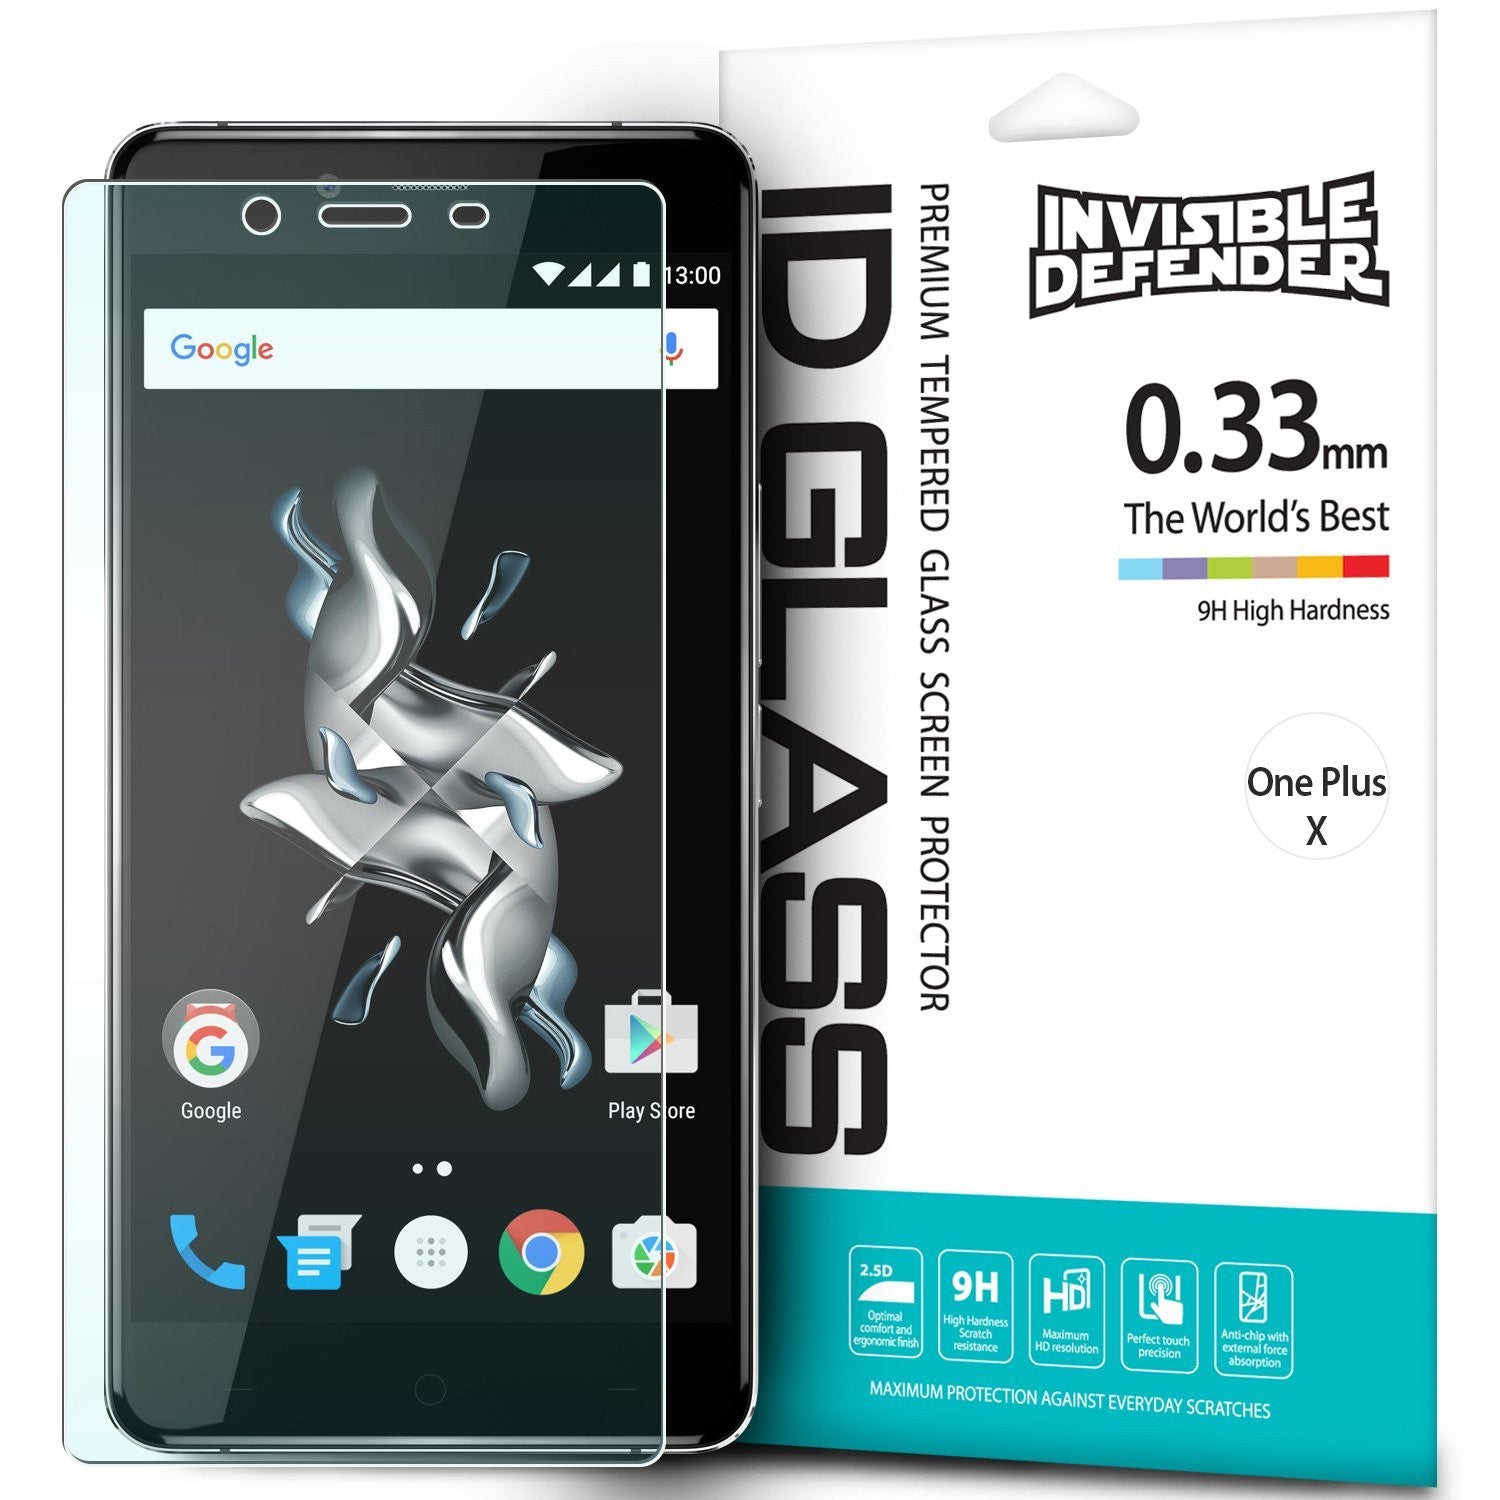 oneplus x invisible defender tempered glass screen protector